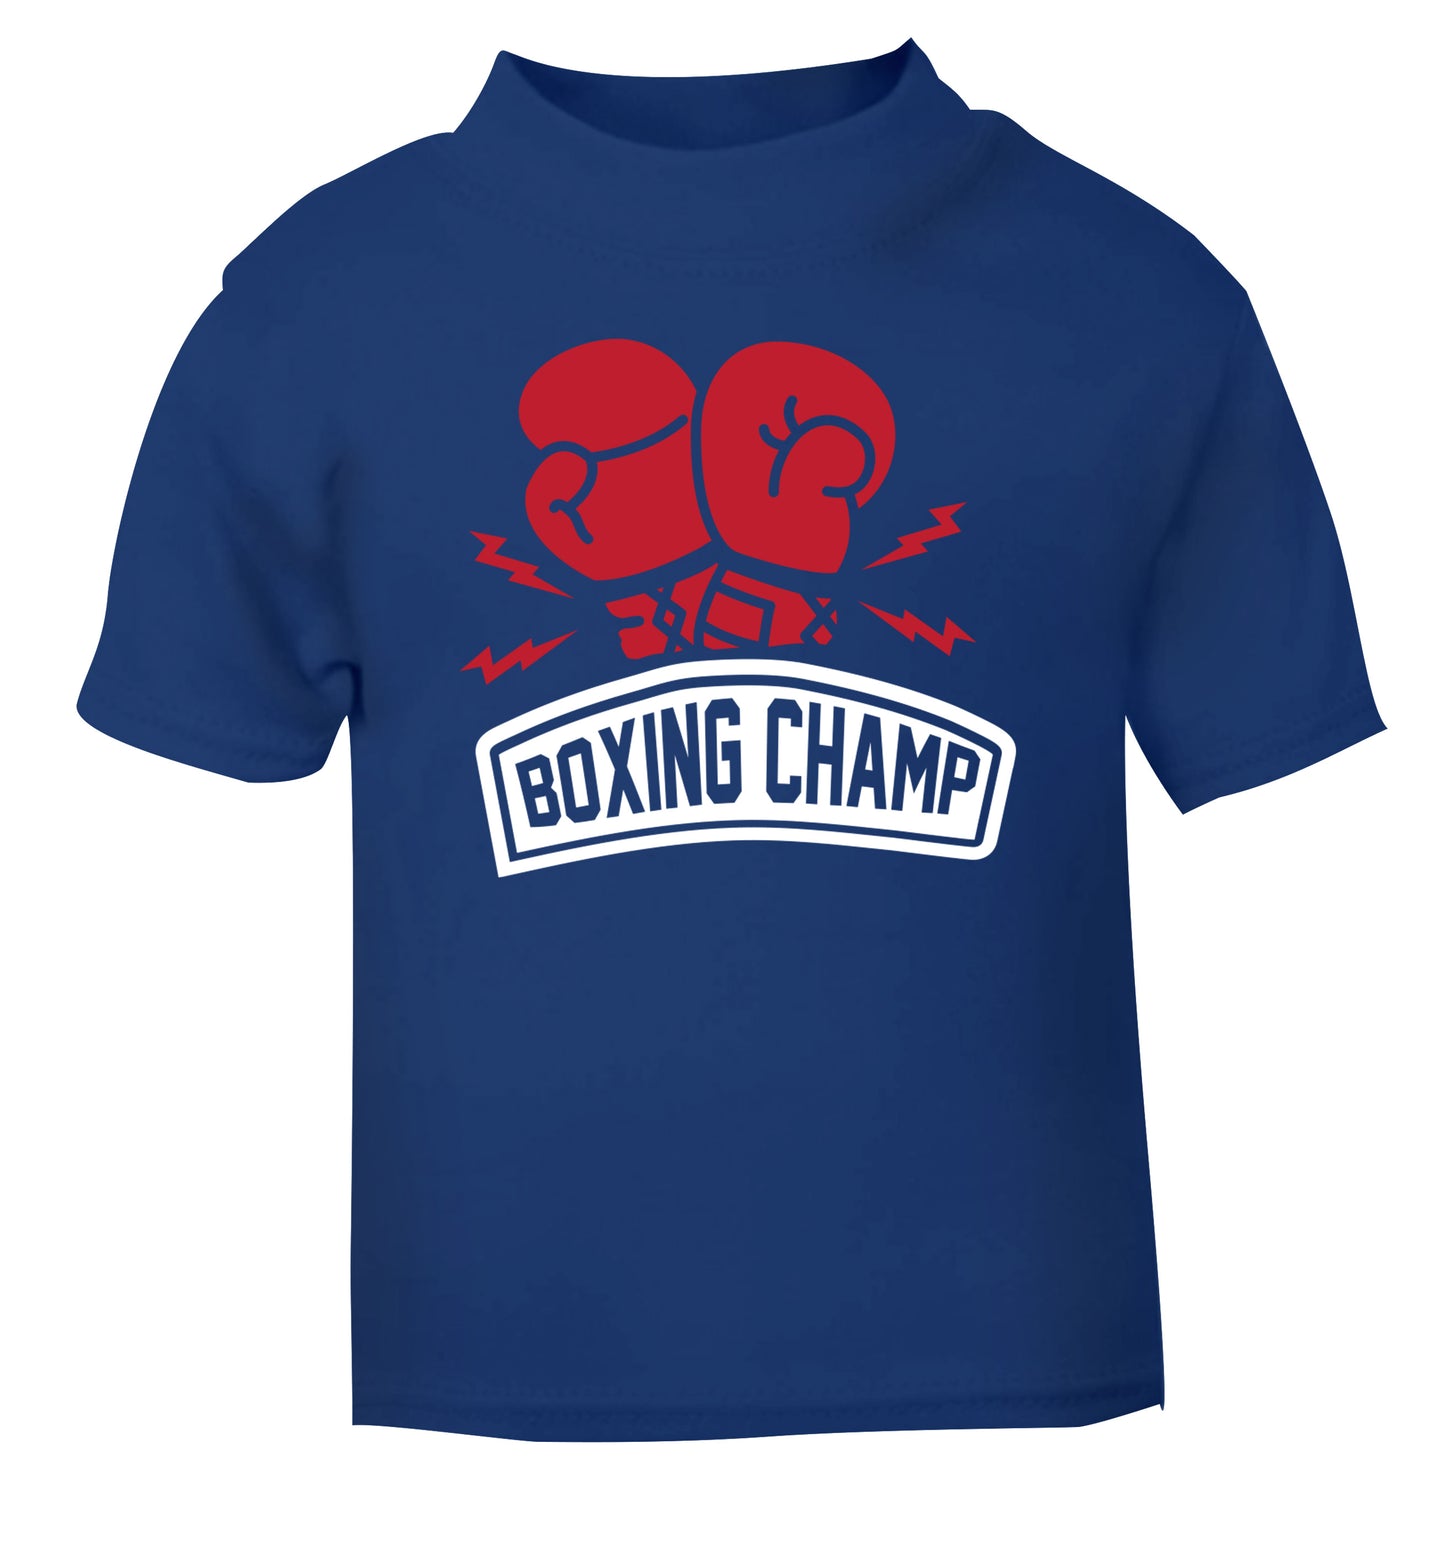 Boxing Champ blue Baby Toddler Tshirt 2 Years